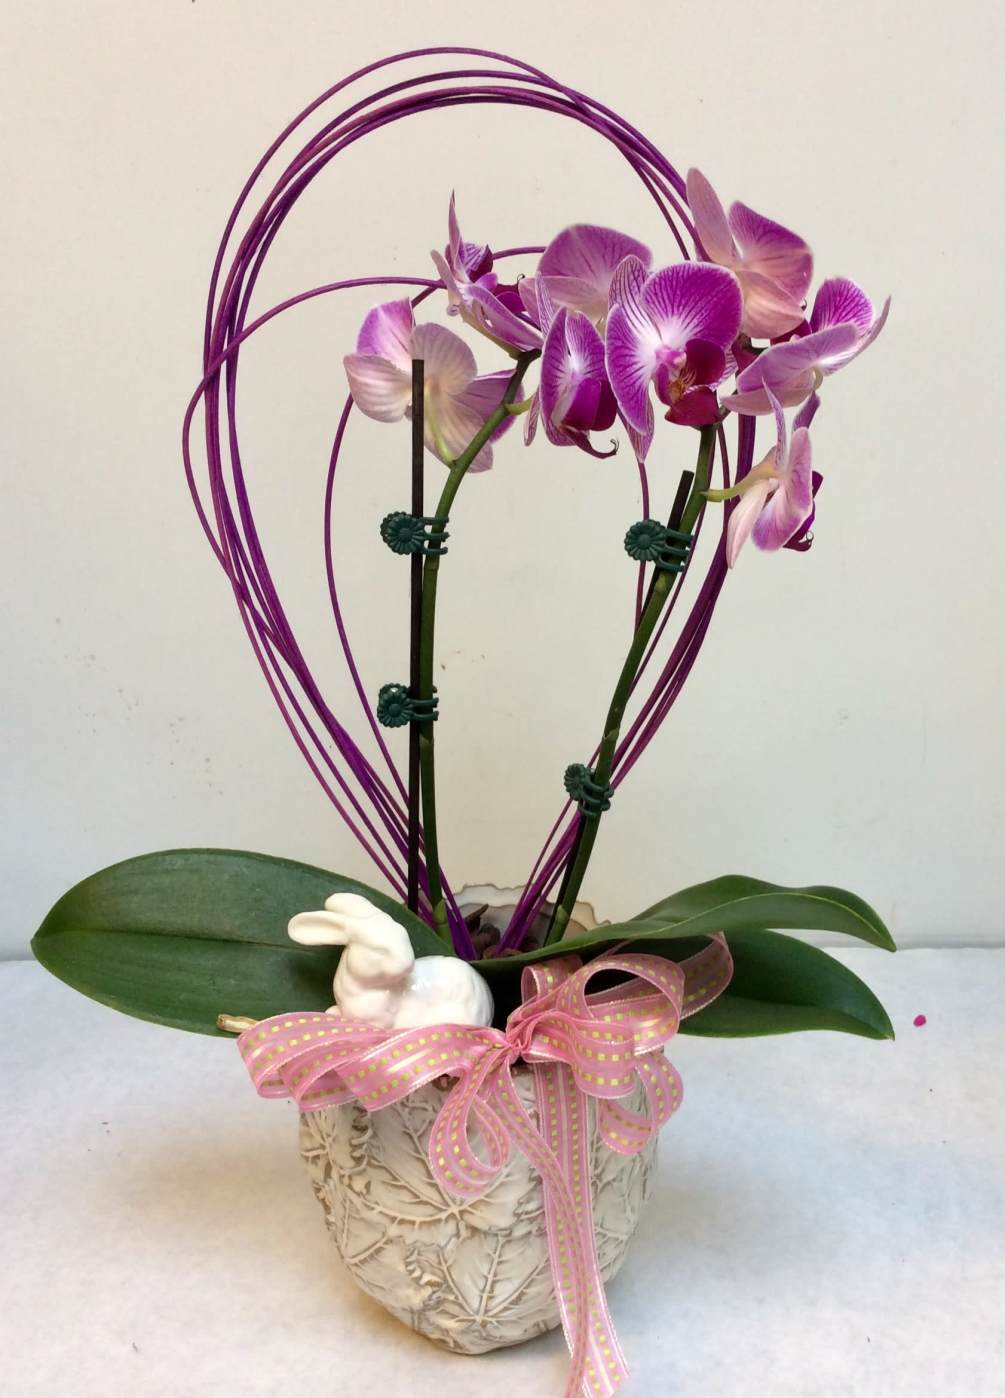 Petite orchid plant filled with blooms